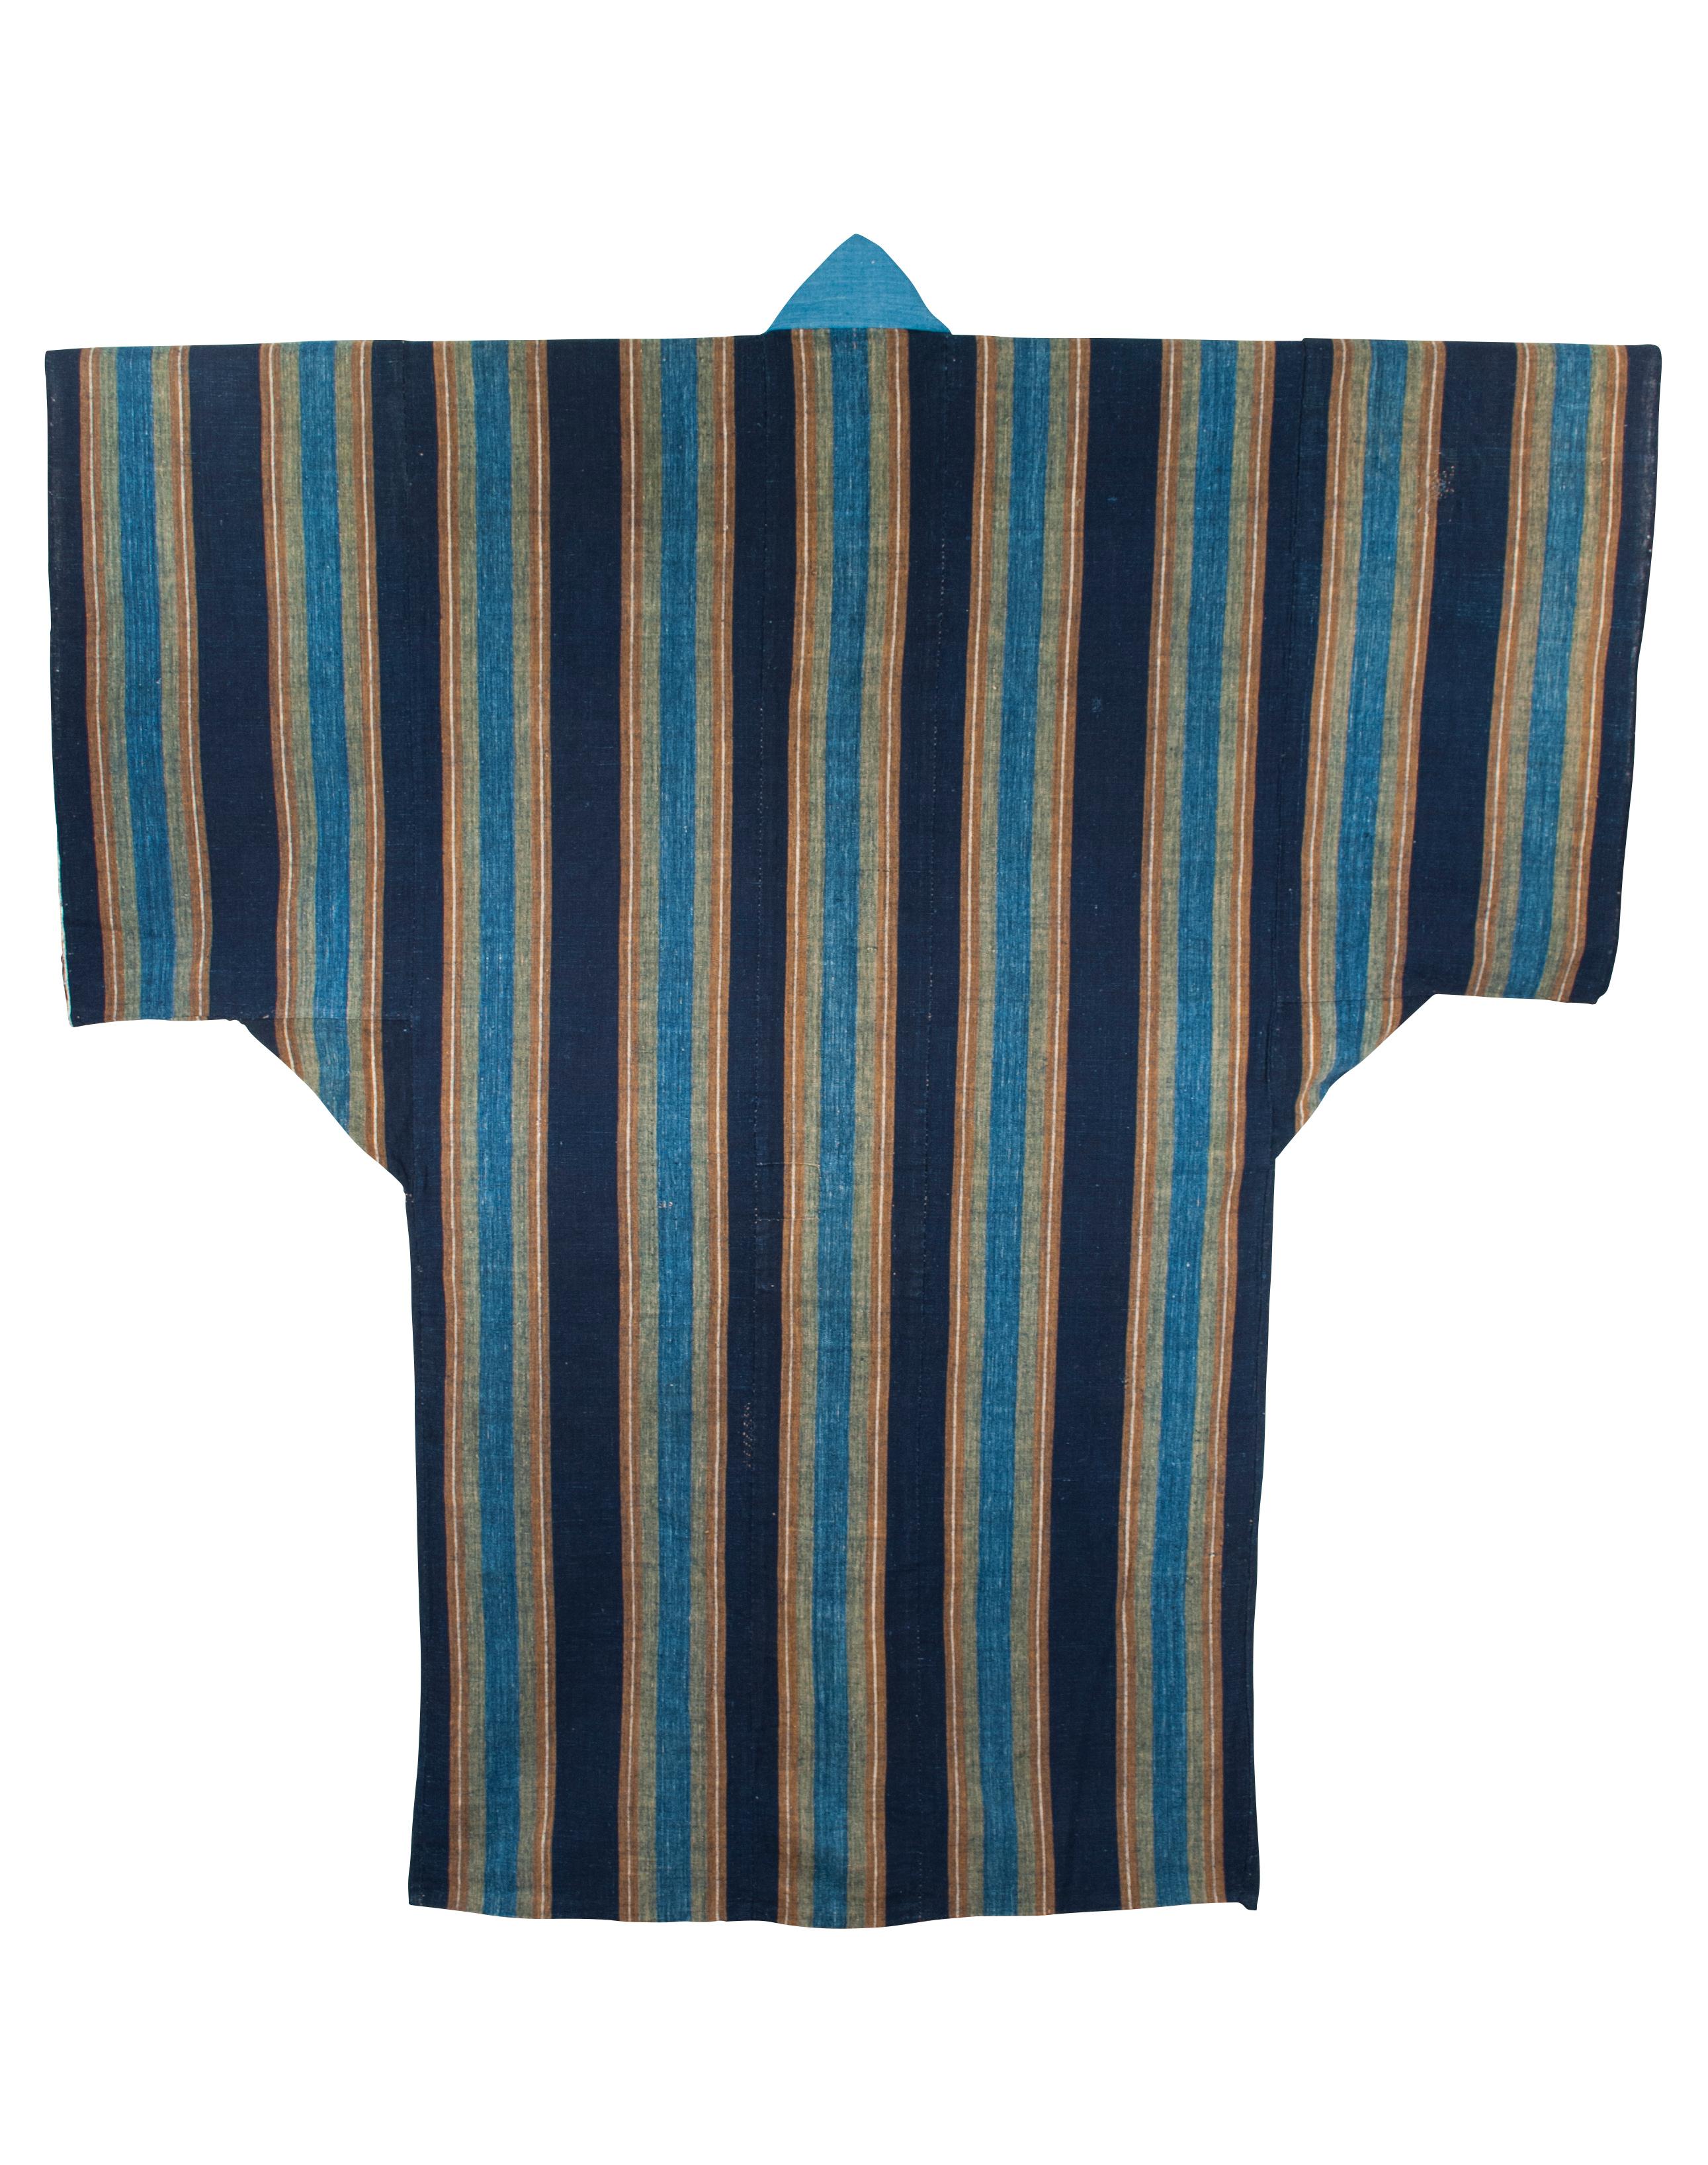 Late Meiji Period sleeping Kimono / Yogi, Japan

Yogi are a type of oversized sleeping kimono traditionally used in Japan. This kimono would have been stuffed with cotton wadding similar to a futon. The cotton and lining have been removed, leaving